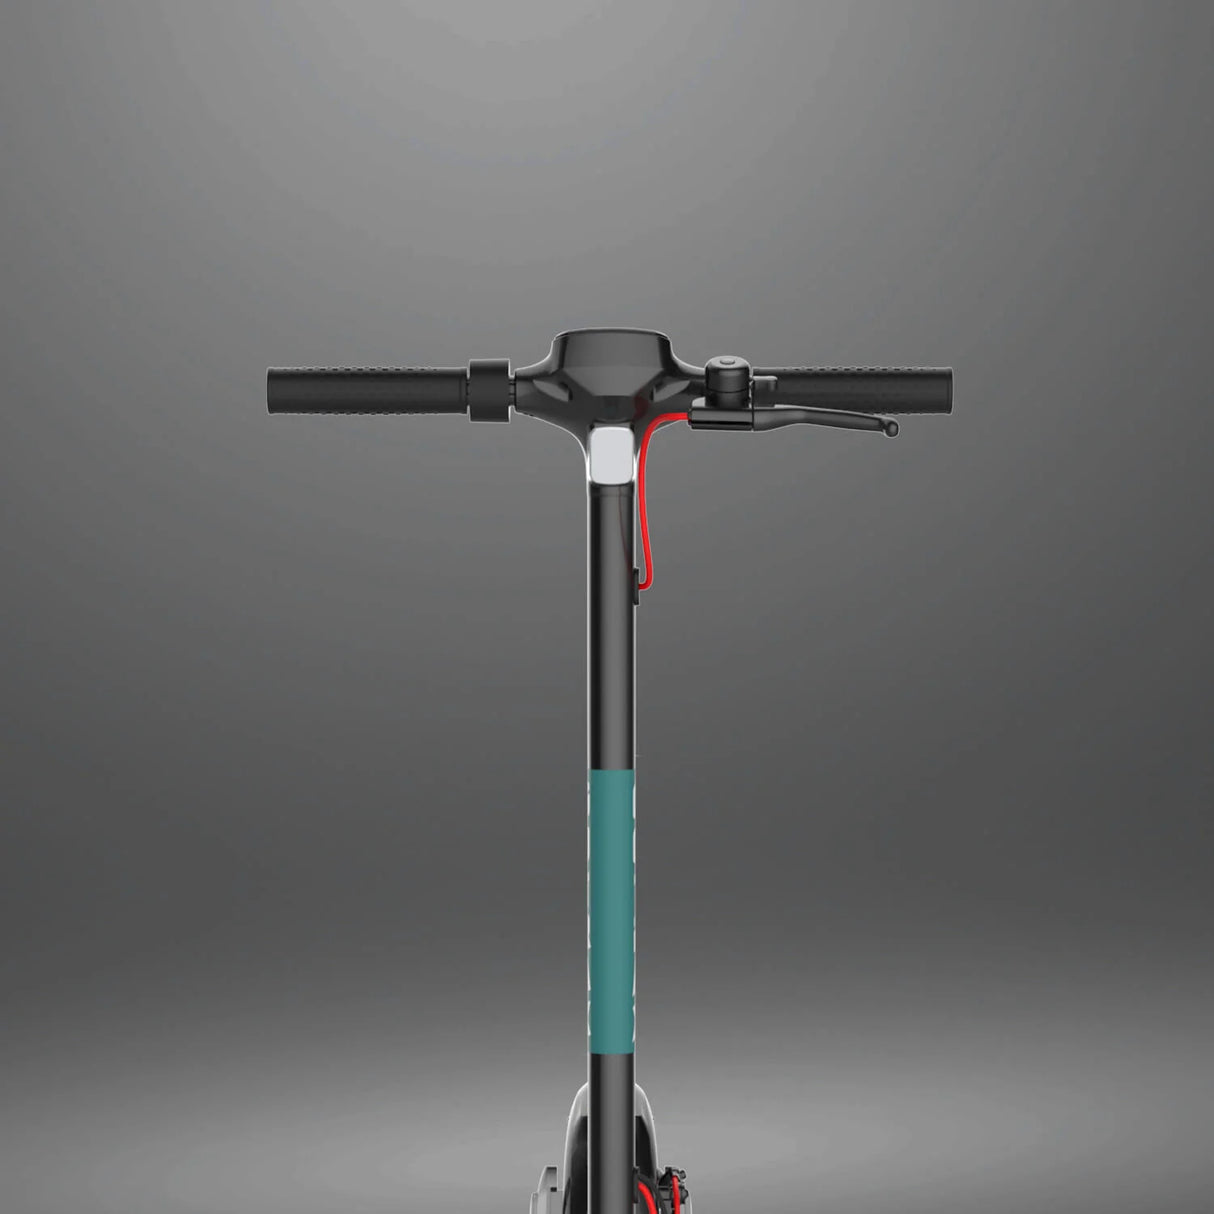 Gotrax Apex Electric Scooter